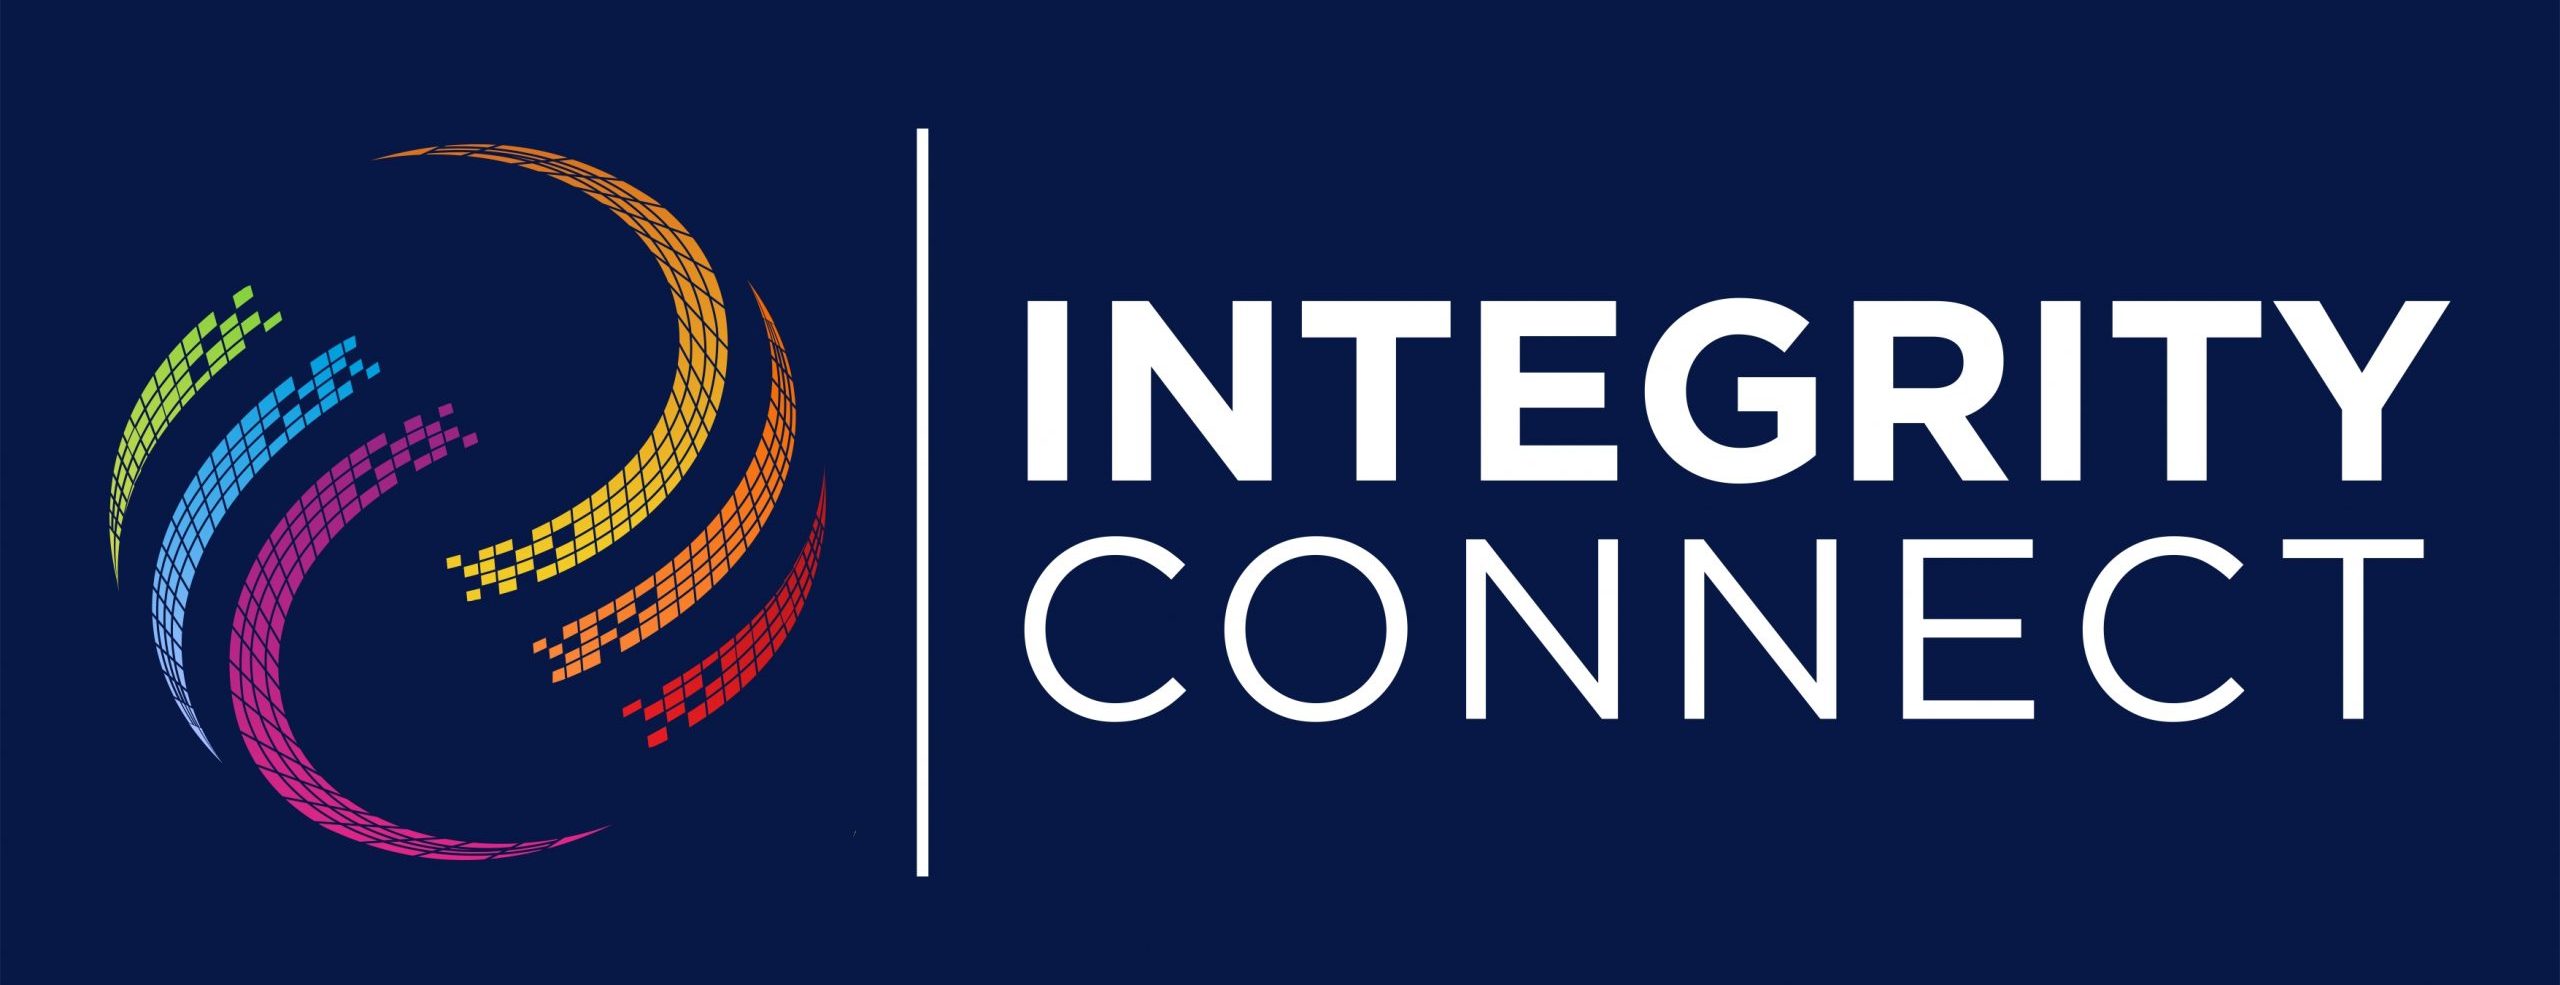 Integrity Connect – Delivering Engaged Communications